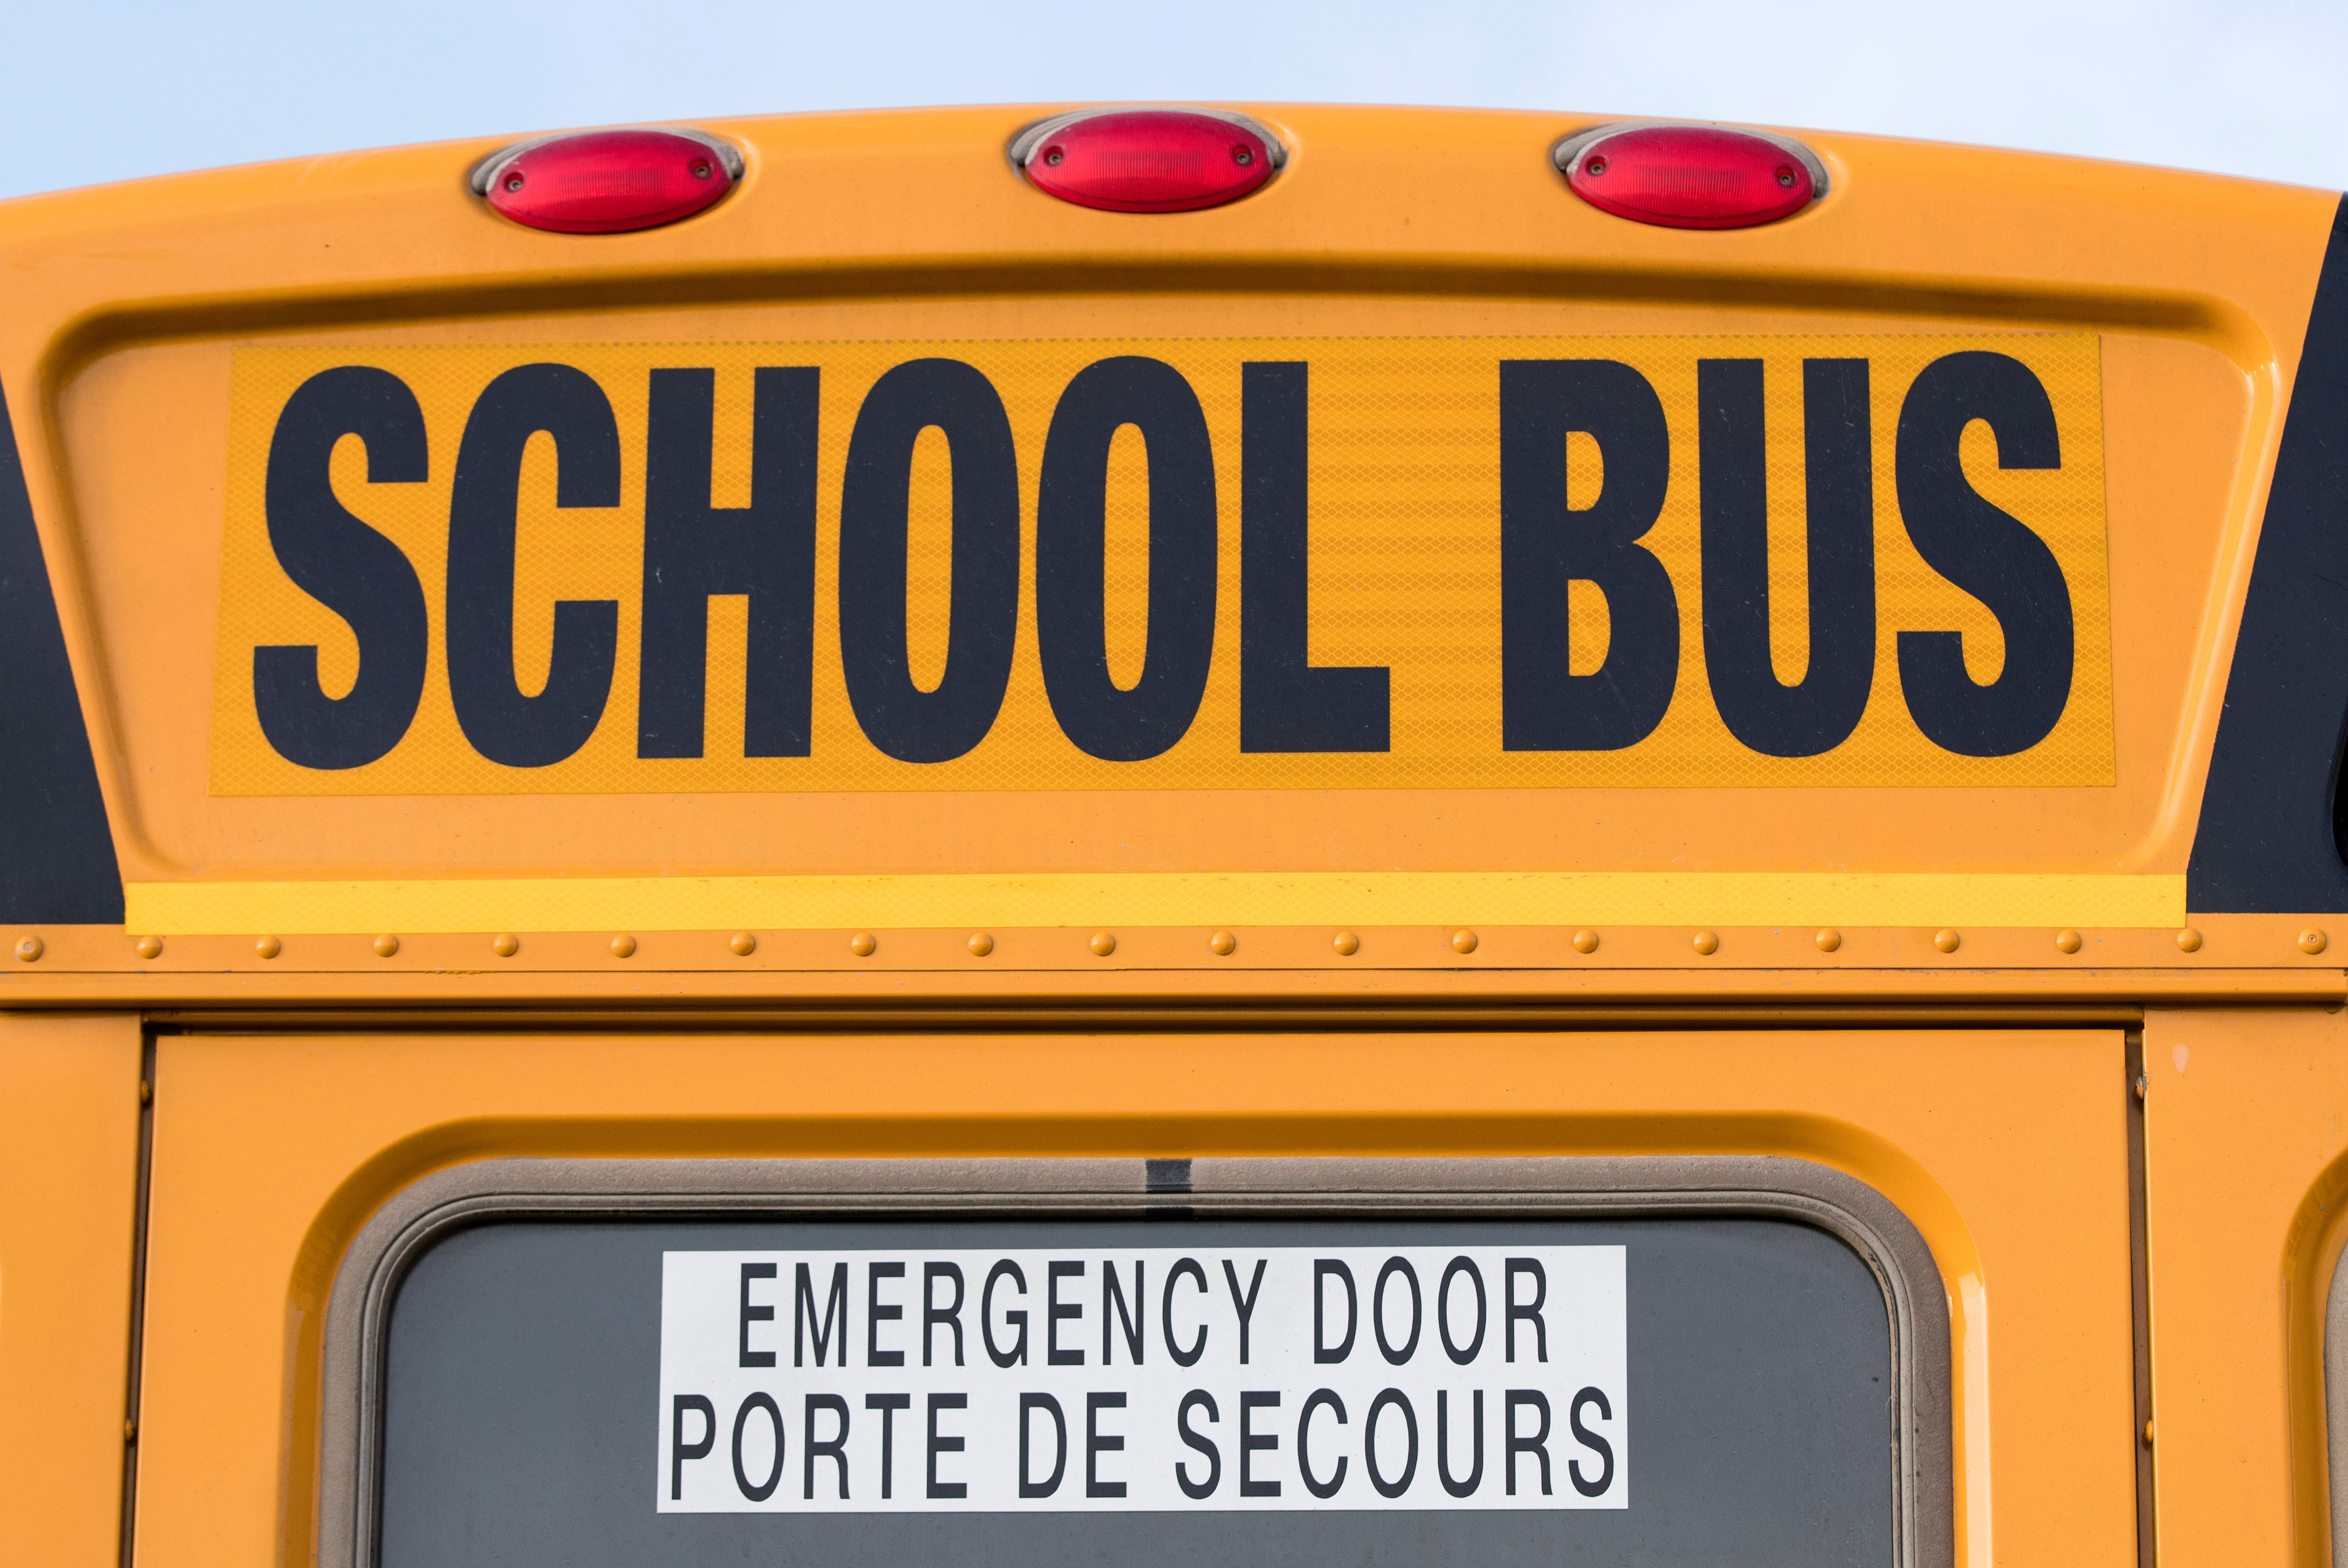 School bus in Marysville, Ont. on Monday, Sept. 3, 2018. THE CANADIAN PRESS IMAGES/Lars Hagberg.